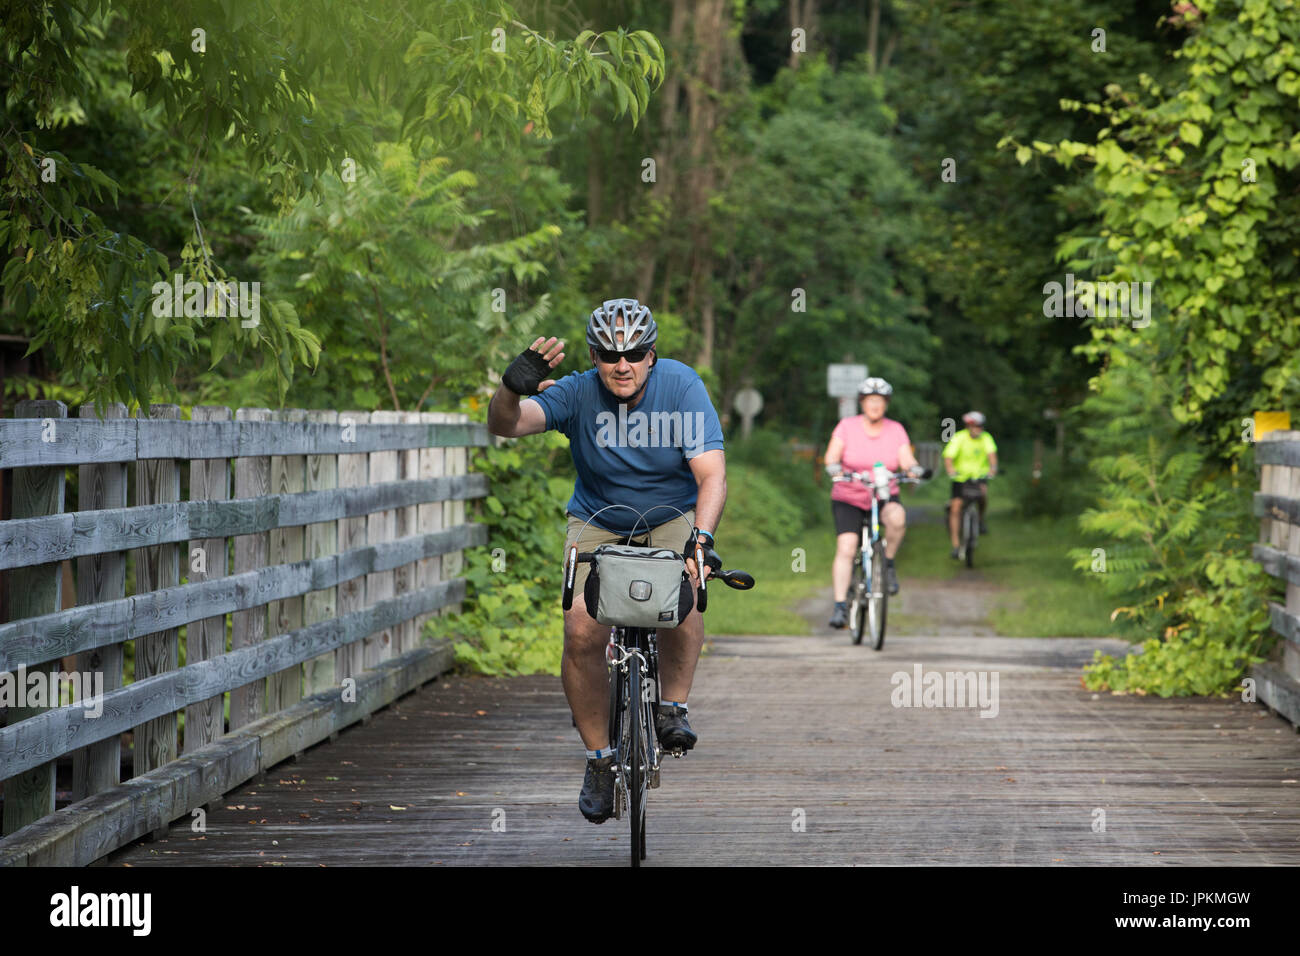 Bicyclists on the Erie Canalway Trail, near Canajoharie, New York State, during the annual Cycle the Erie Canal bike tour event. Stock Photo